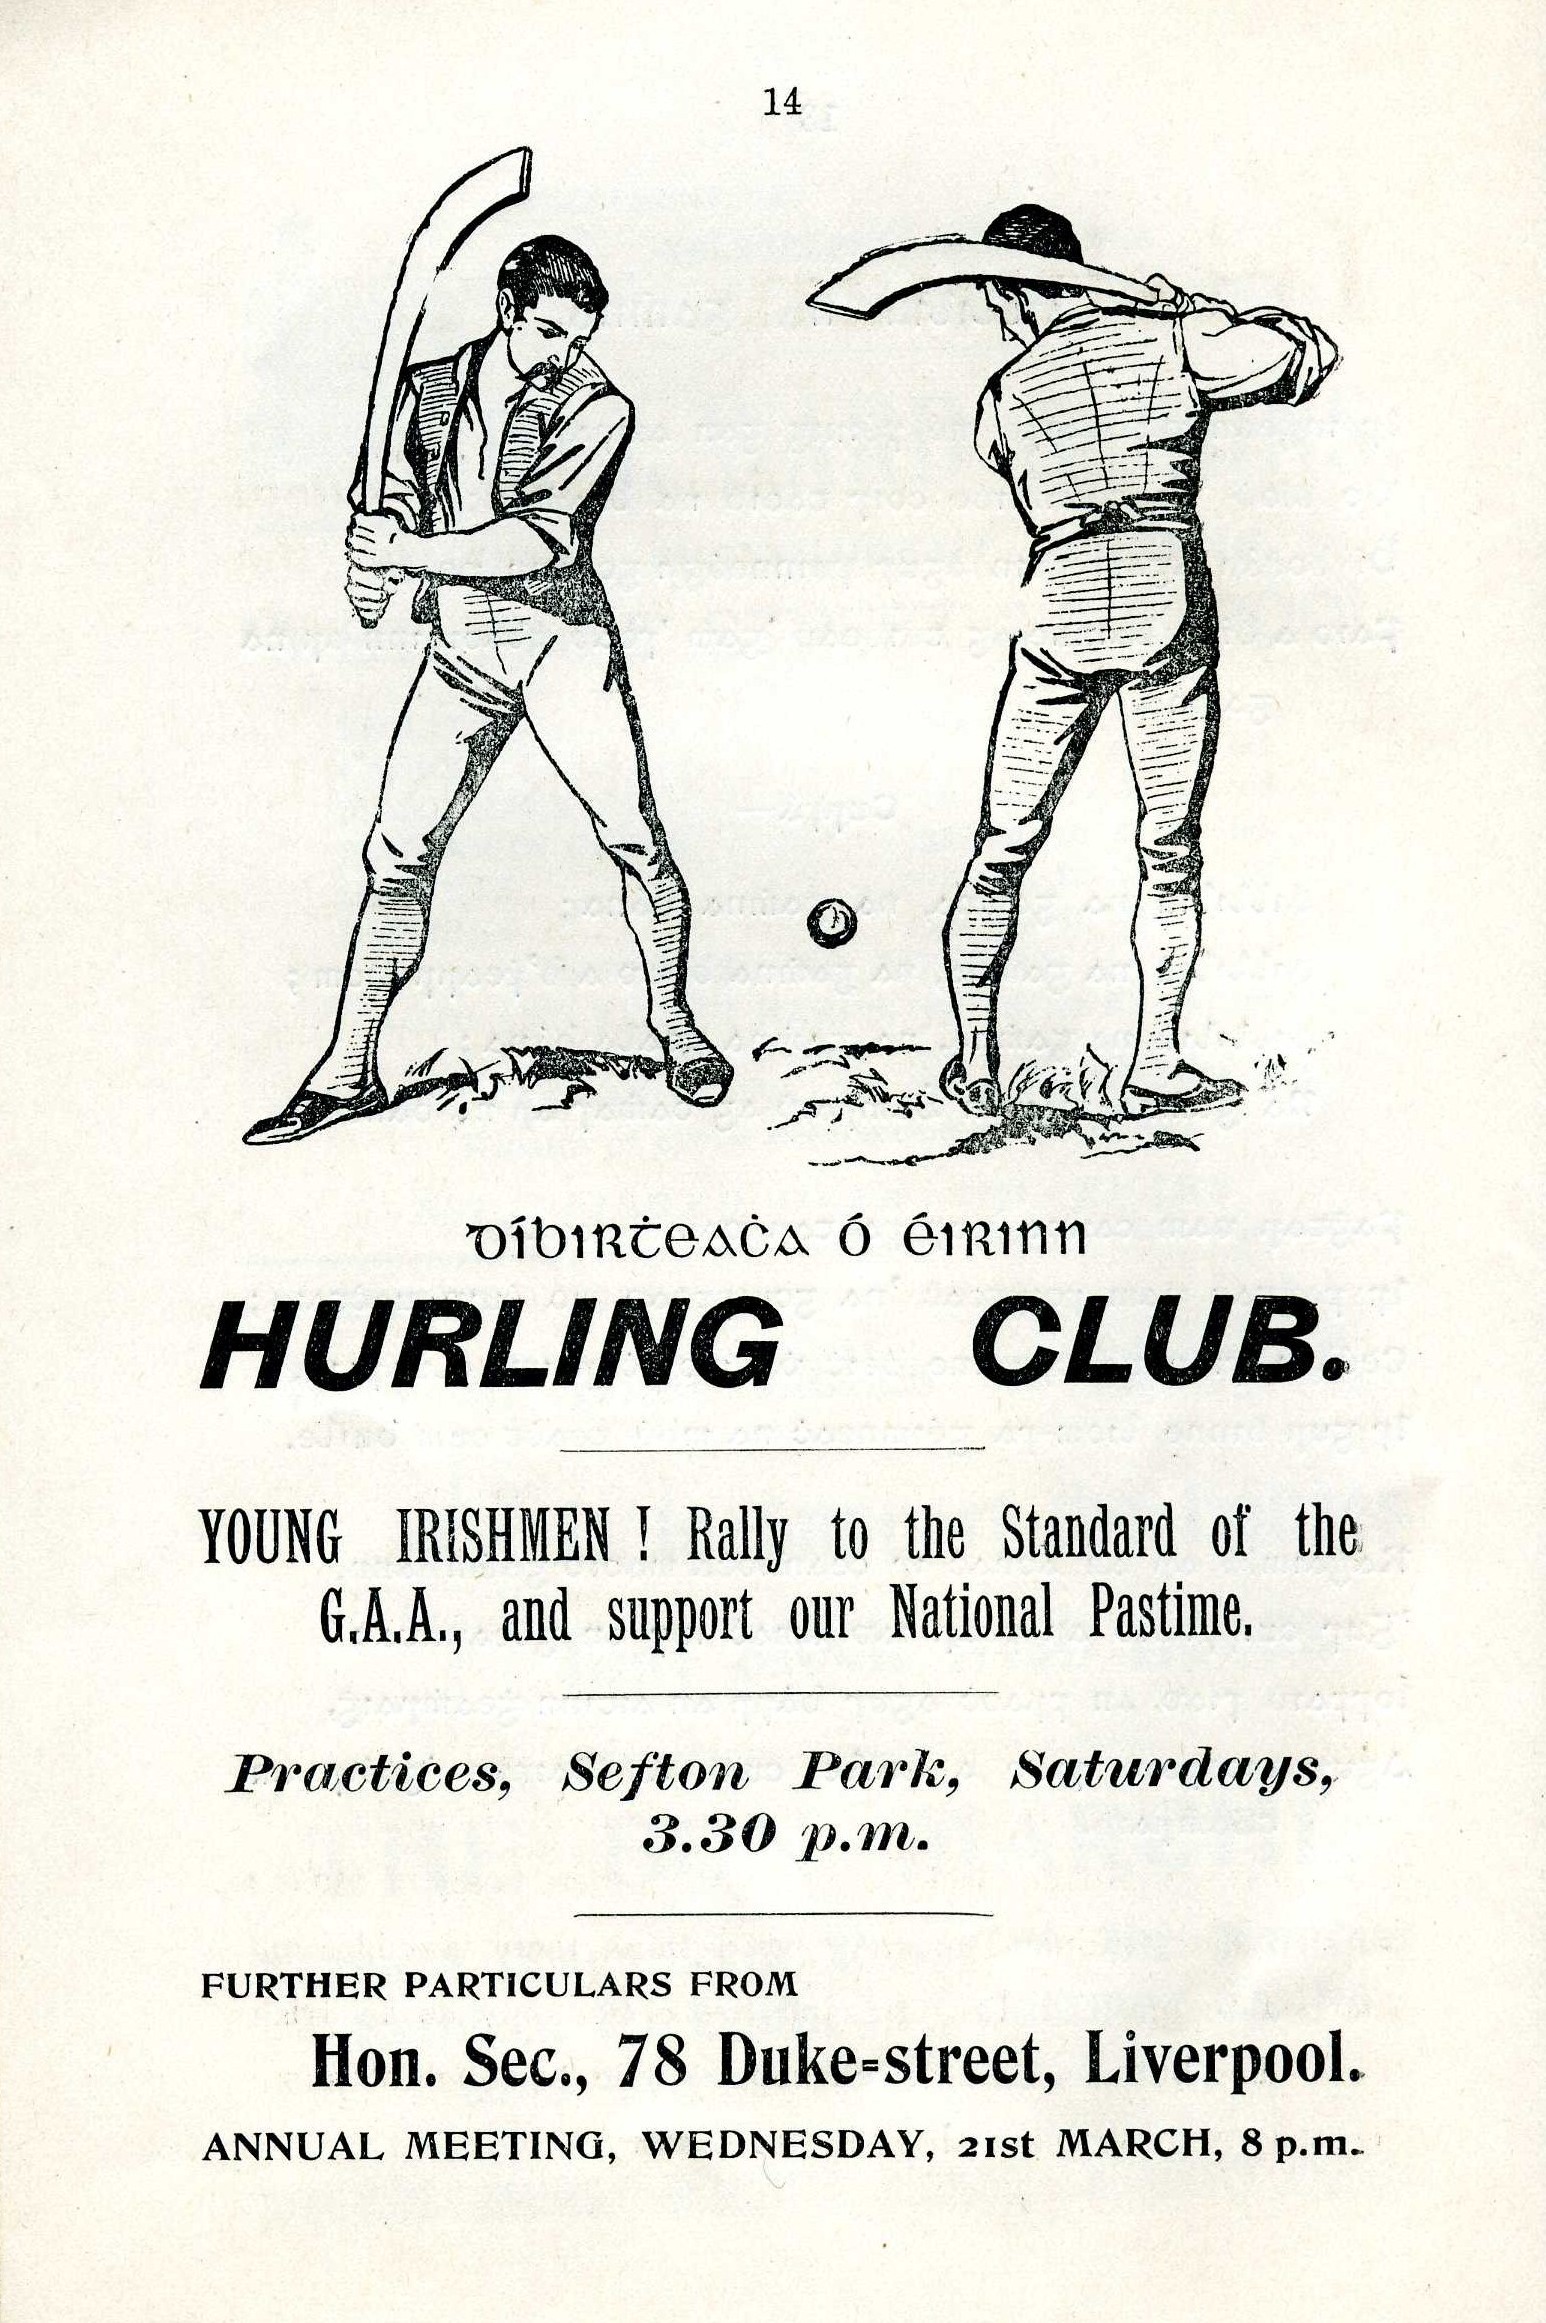 A plea for young Irishmen to attend hurling practices at Sexton Park, which was carried in a concert programme published by Conradh na Gaeilge in Liverpool, 14th March 1906.